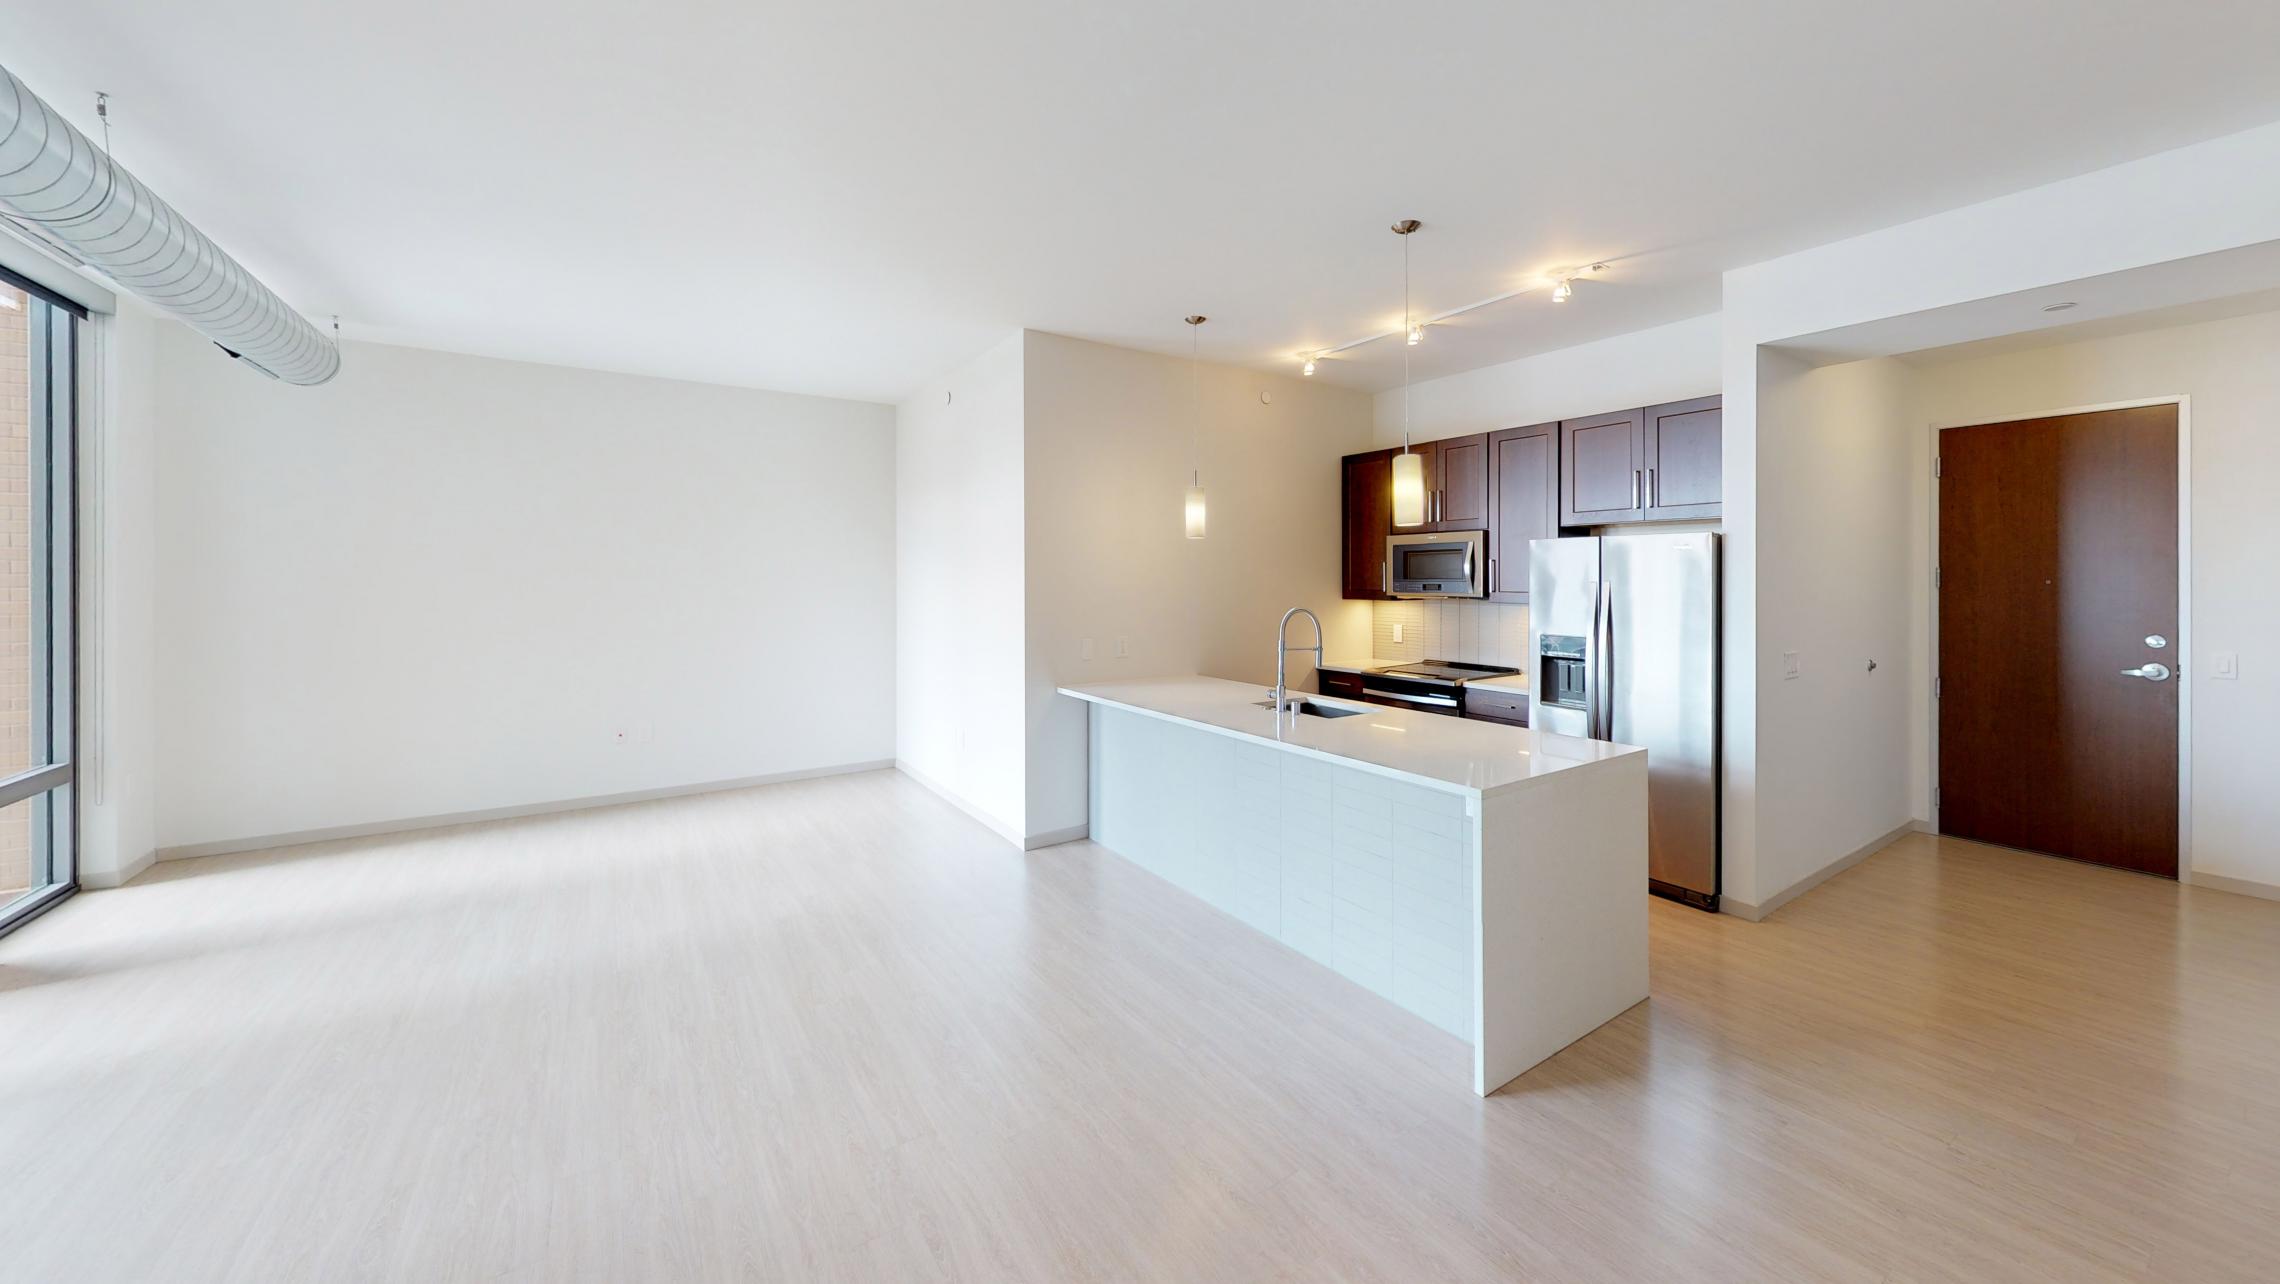 Pressman-Apartment-704-One-Bedroom-Balcony-City-View-Luxury-Downtown-Upscale-Modern-Downtown-Madison-Capitol-Square-Kitchen-Entrance.jpg